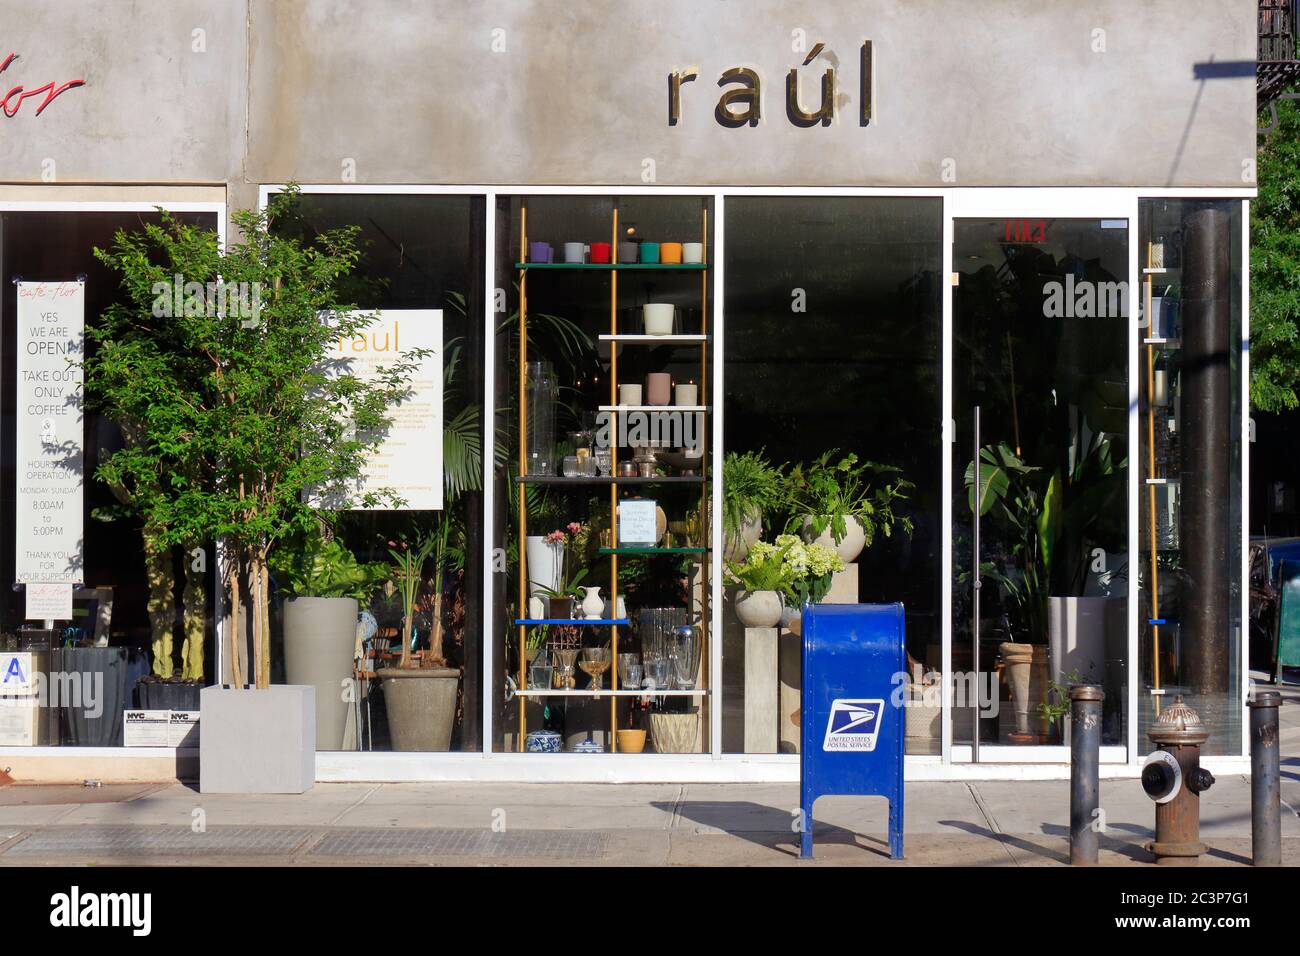 Raúl, 216 8th Ave, New York, NYC storefront photo of a flower shop and home decorations shop in the Chelsea neighborhood of Manhattan. Stock Photo